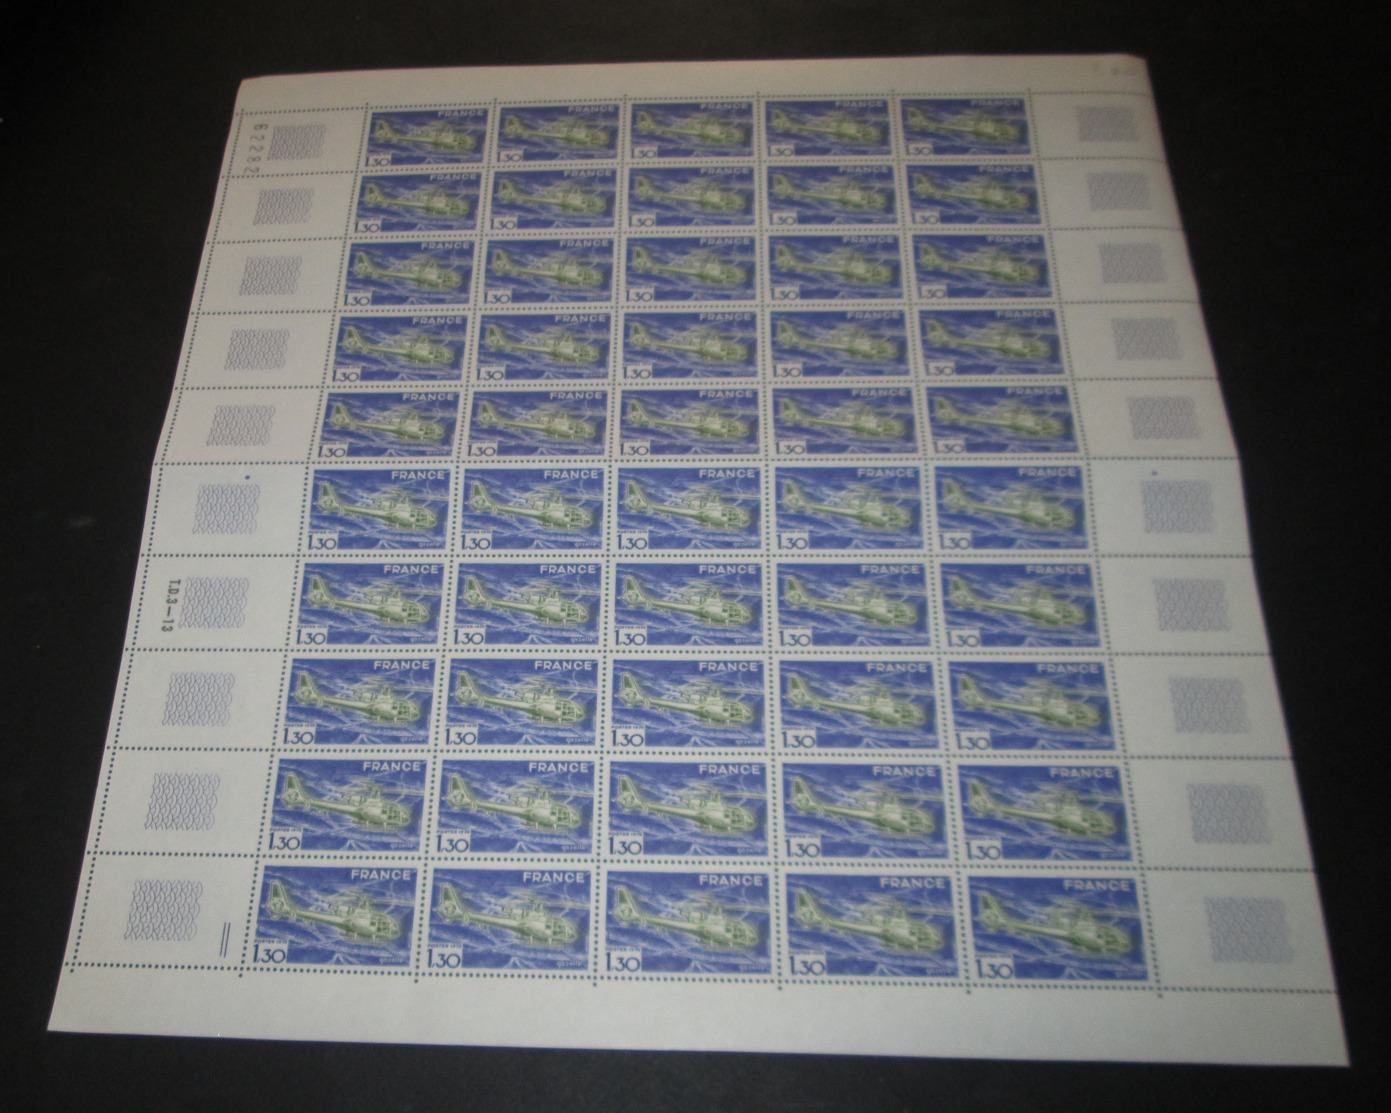 France 1974  Neuf** N° 1805 Hélicoptère Gazelle   Feuille  Complète (full Sheet) 50 Timbres - Full Sheets